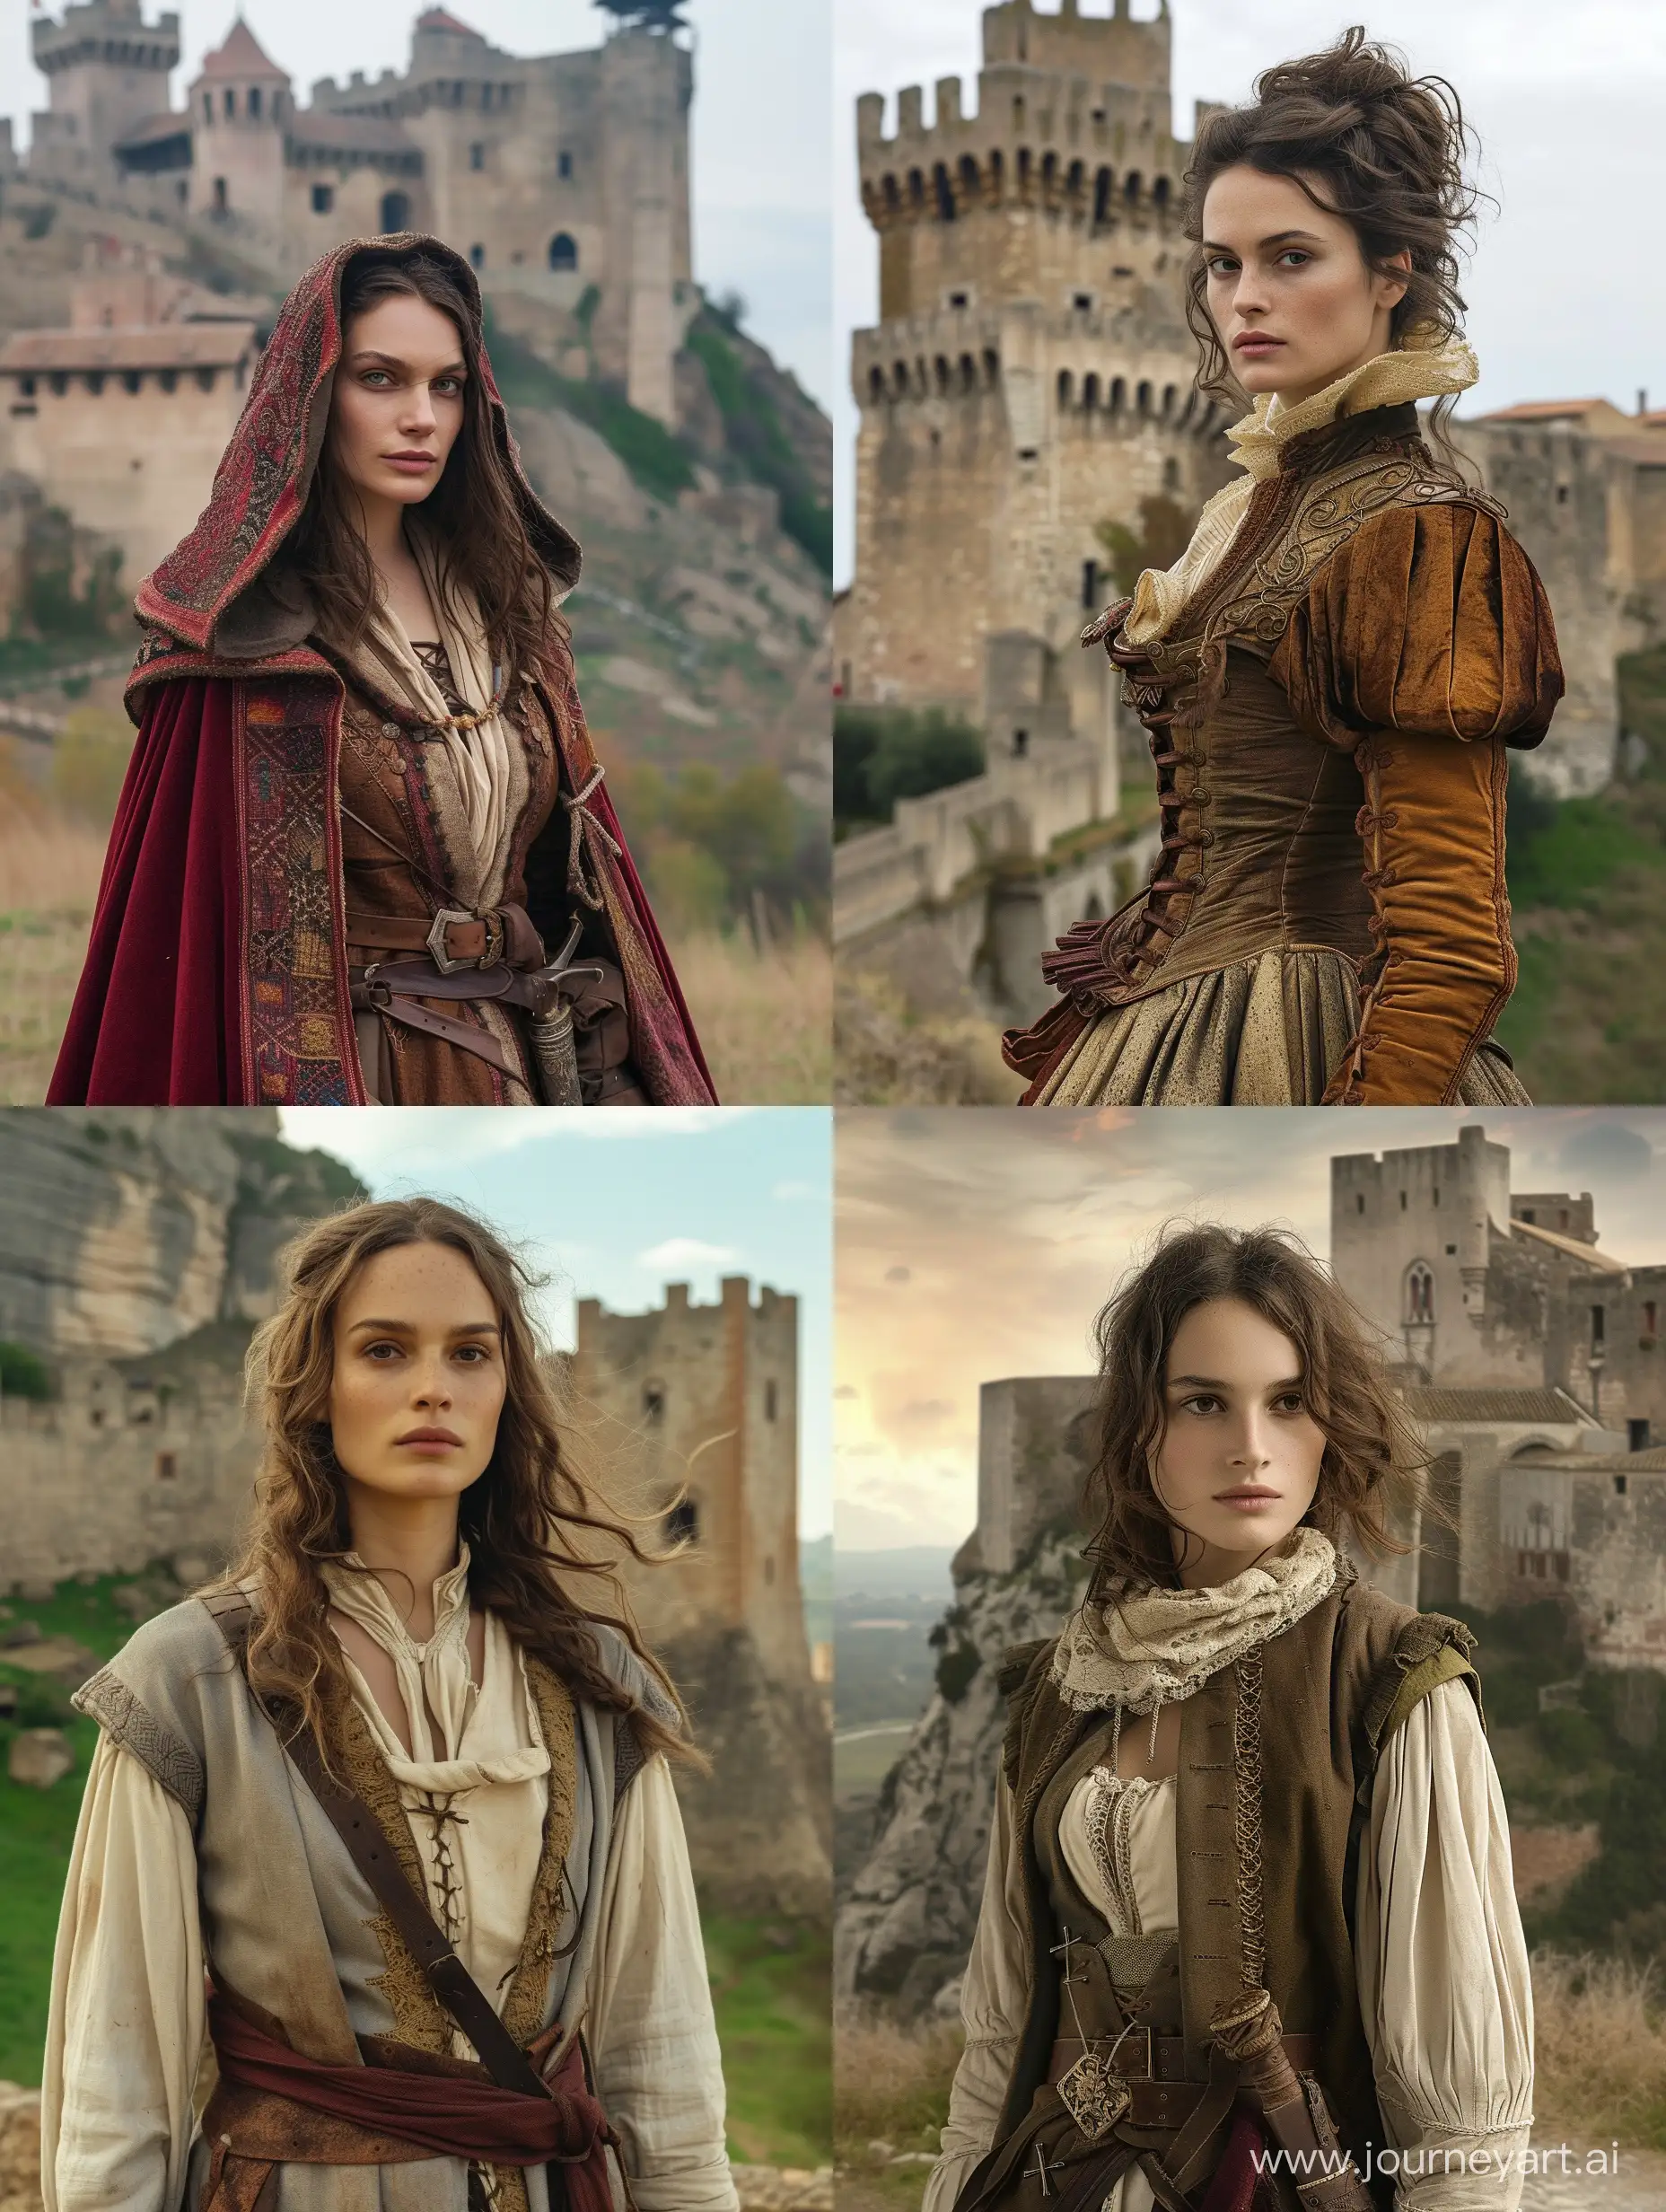 woman similar to kiera knightley, dressed in medieval clothes, standing in fron of medieval fortress